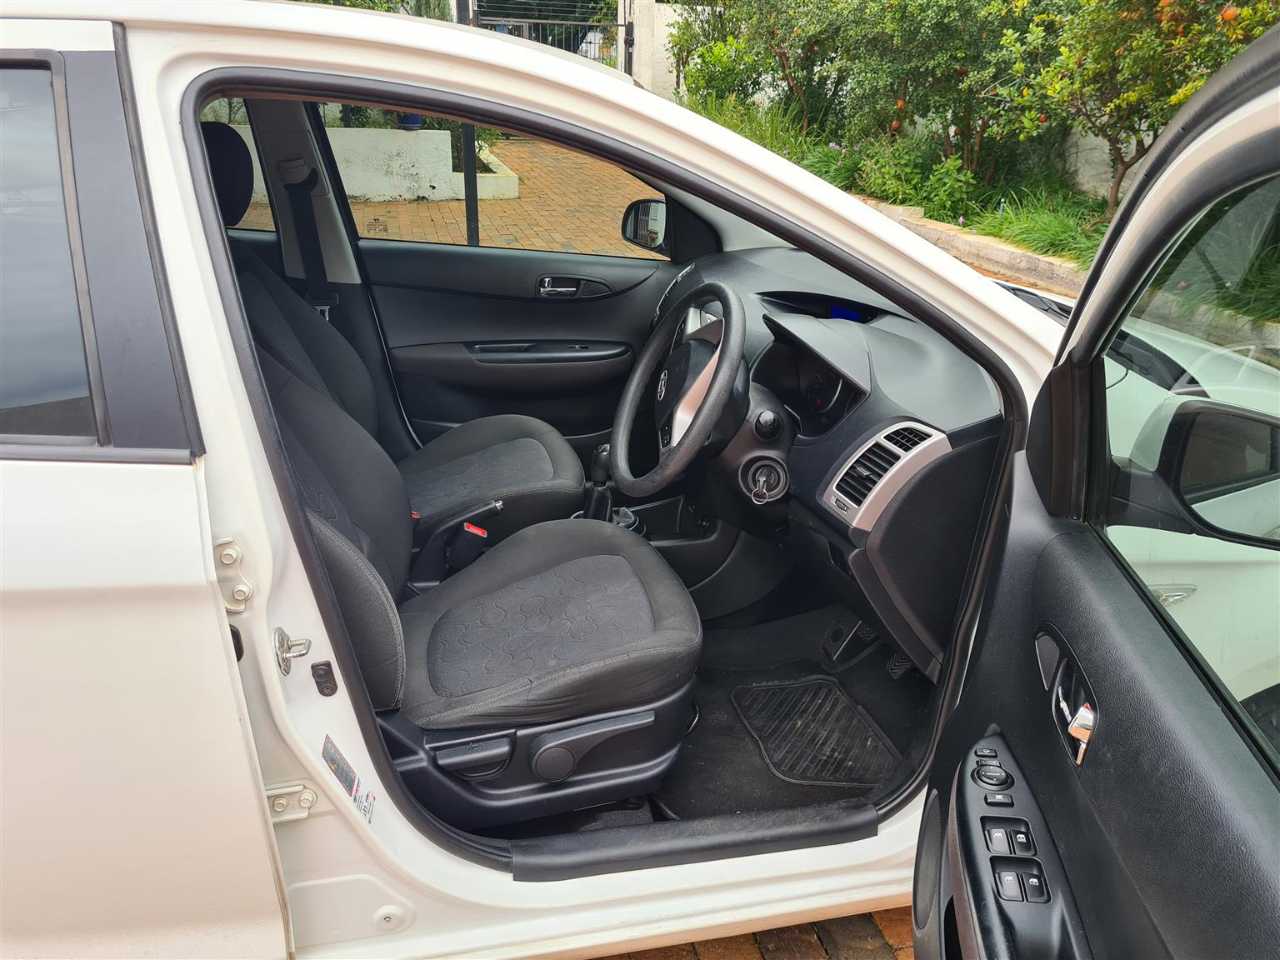 A picture of Hyundai i20 